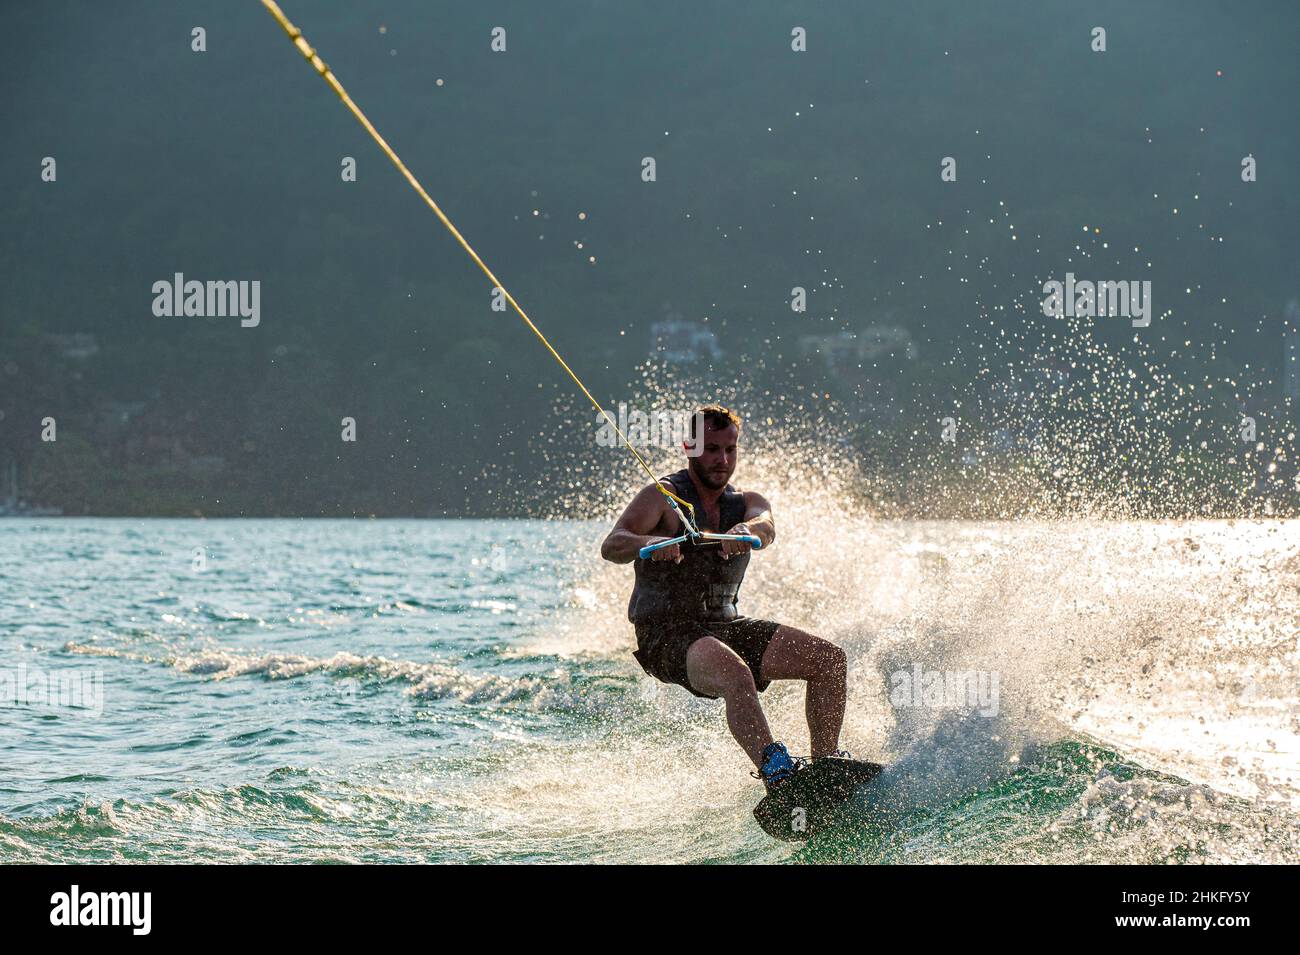 France, haute-Savoie (74), Annecy, Lac d'Annecy, wakeboarder Banque D'Images